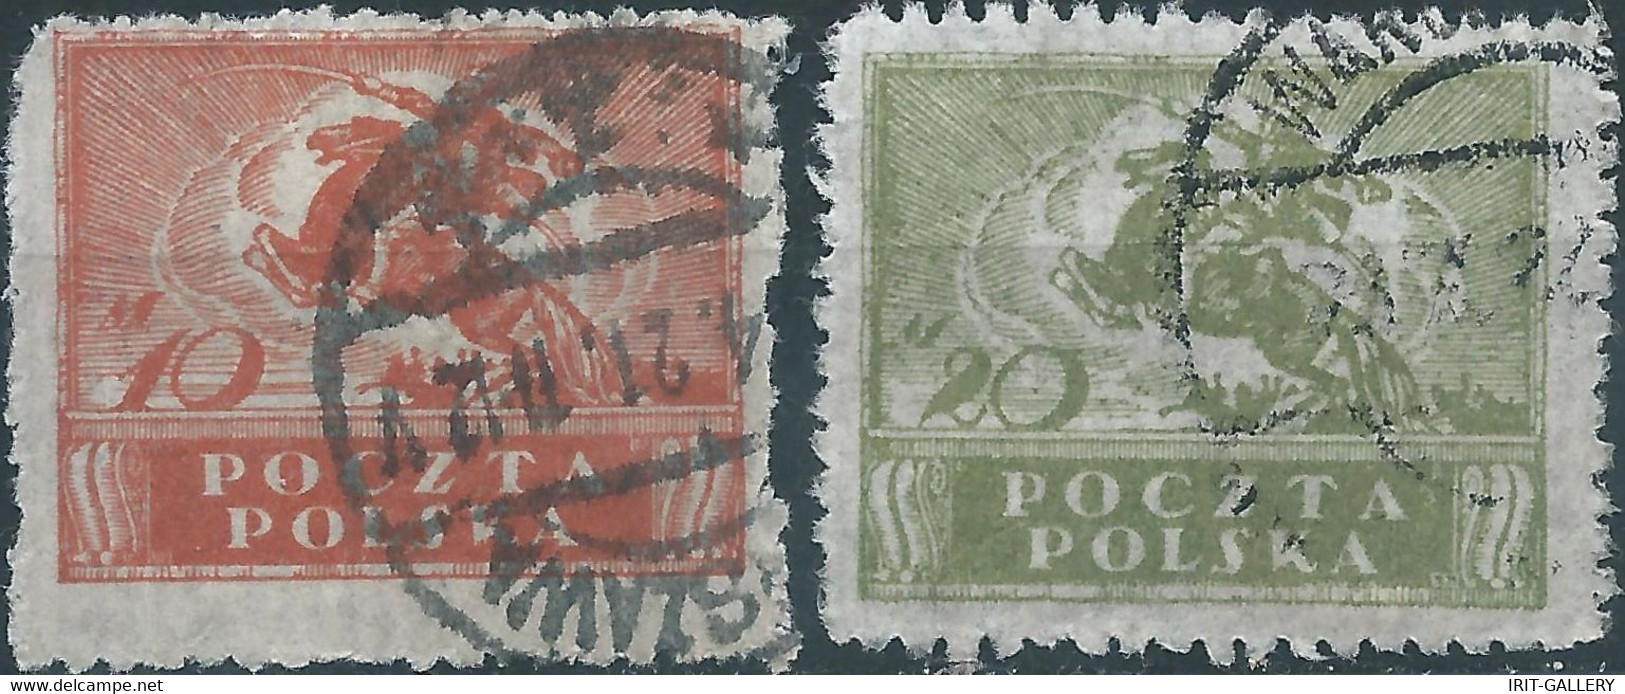 POLONIA-POLAND-POLSKA,1919 South And North Poland Issues -10M & 20M ,Obliterated - Used Stamps